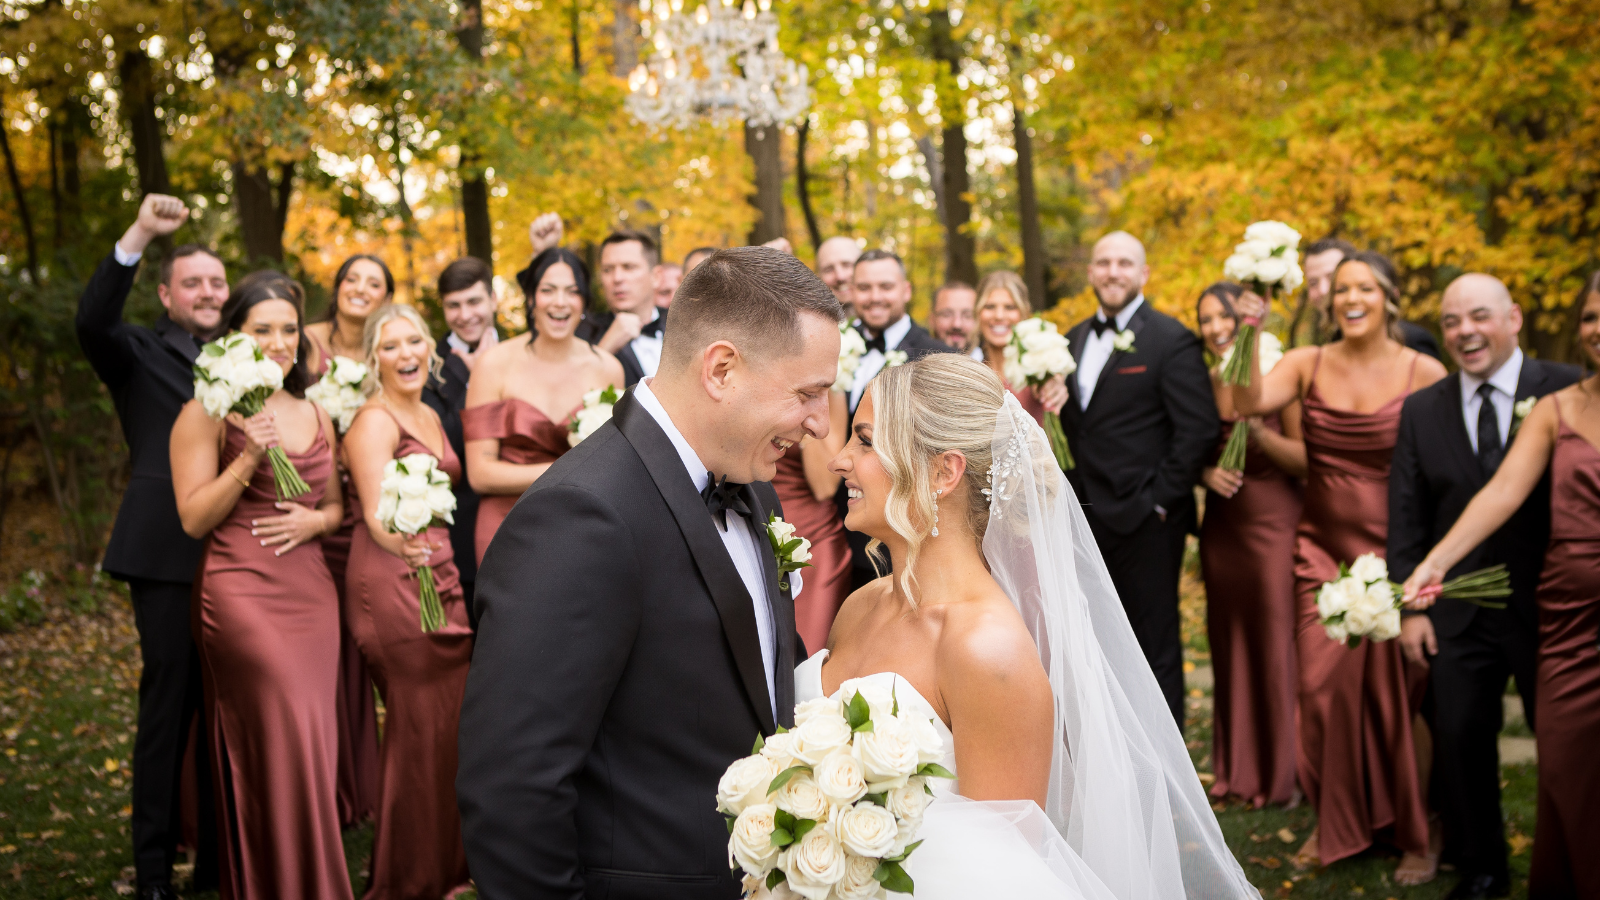 Tie the Knot in Fall at Crystal Plaza